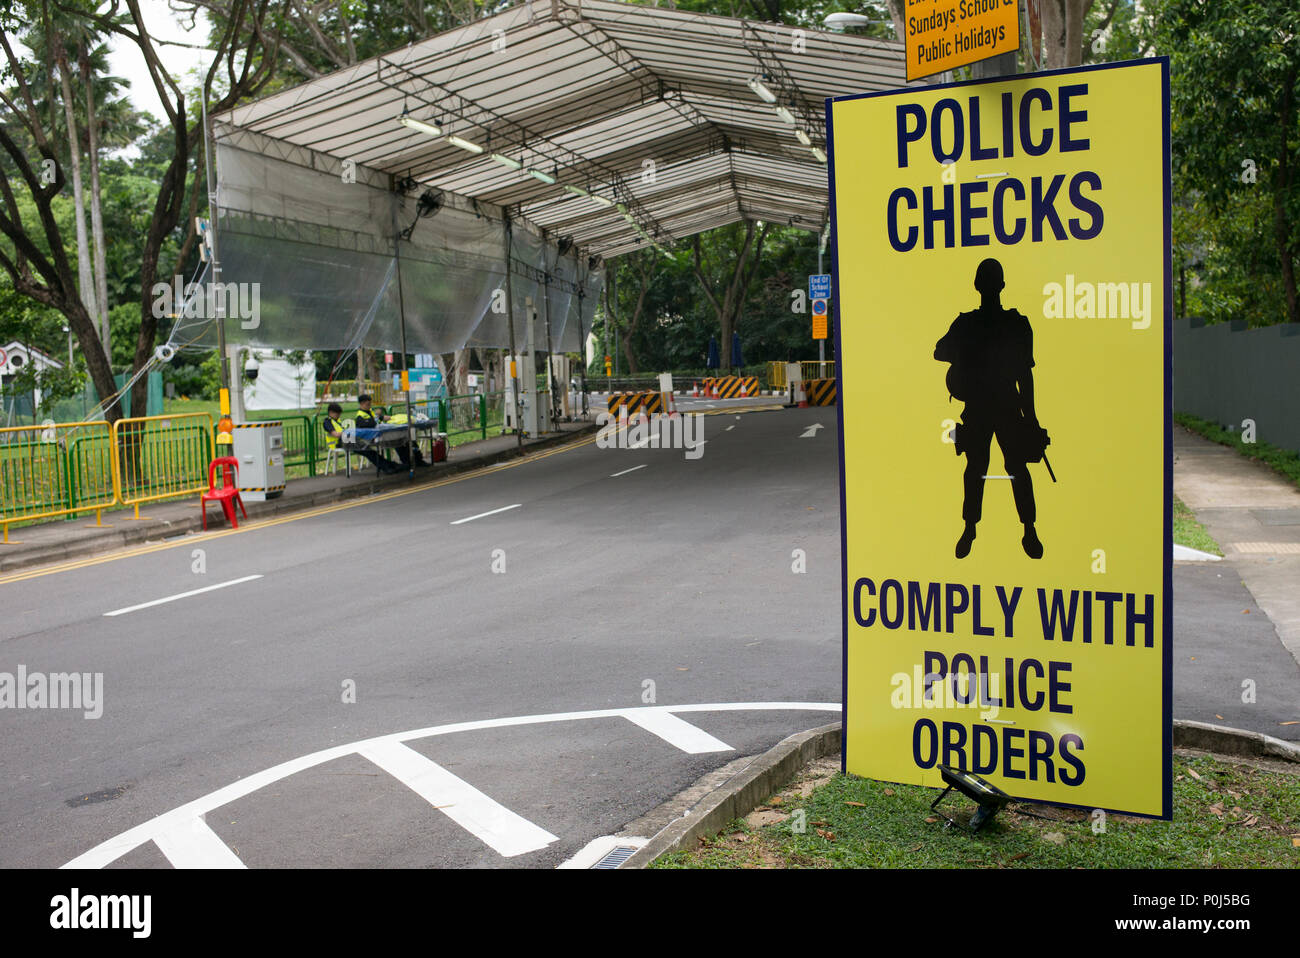 Singapore. 10 June, 2018.  Security checks in the process of being set up ahead of Donald Trump's visit to Singapore for his summit with Kim Jong-un.  This area, Anderson Road, leads to the wing of the Shangrila Hotel where Trump will be staying during his visit. Credit: Richard Coulstock/Alamy Live News Stock Photo